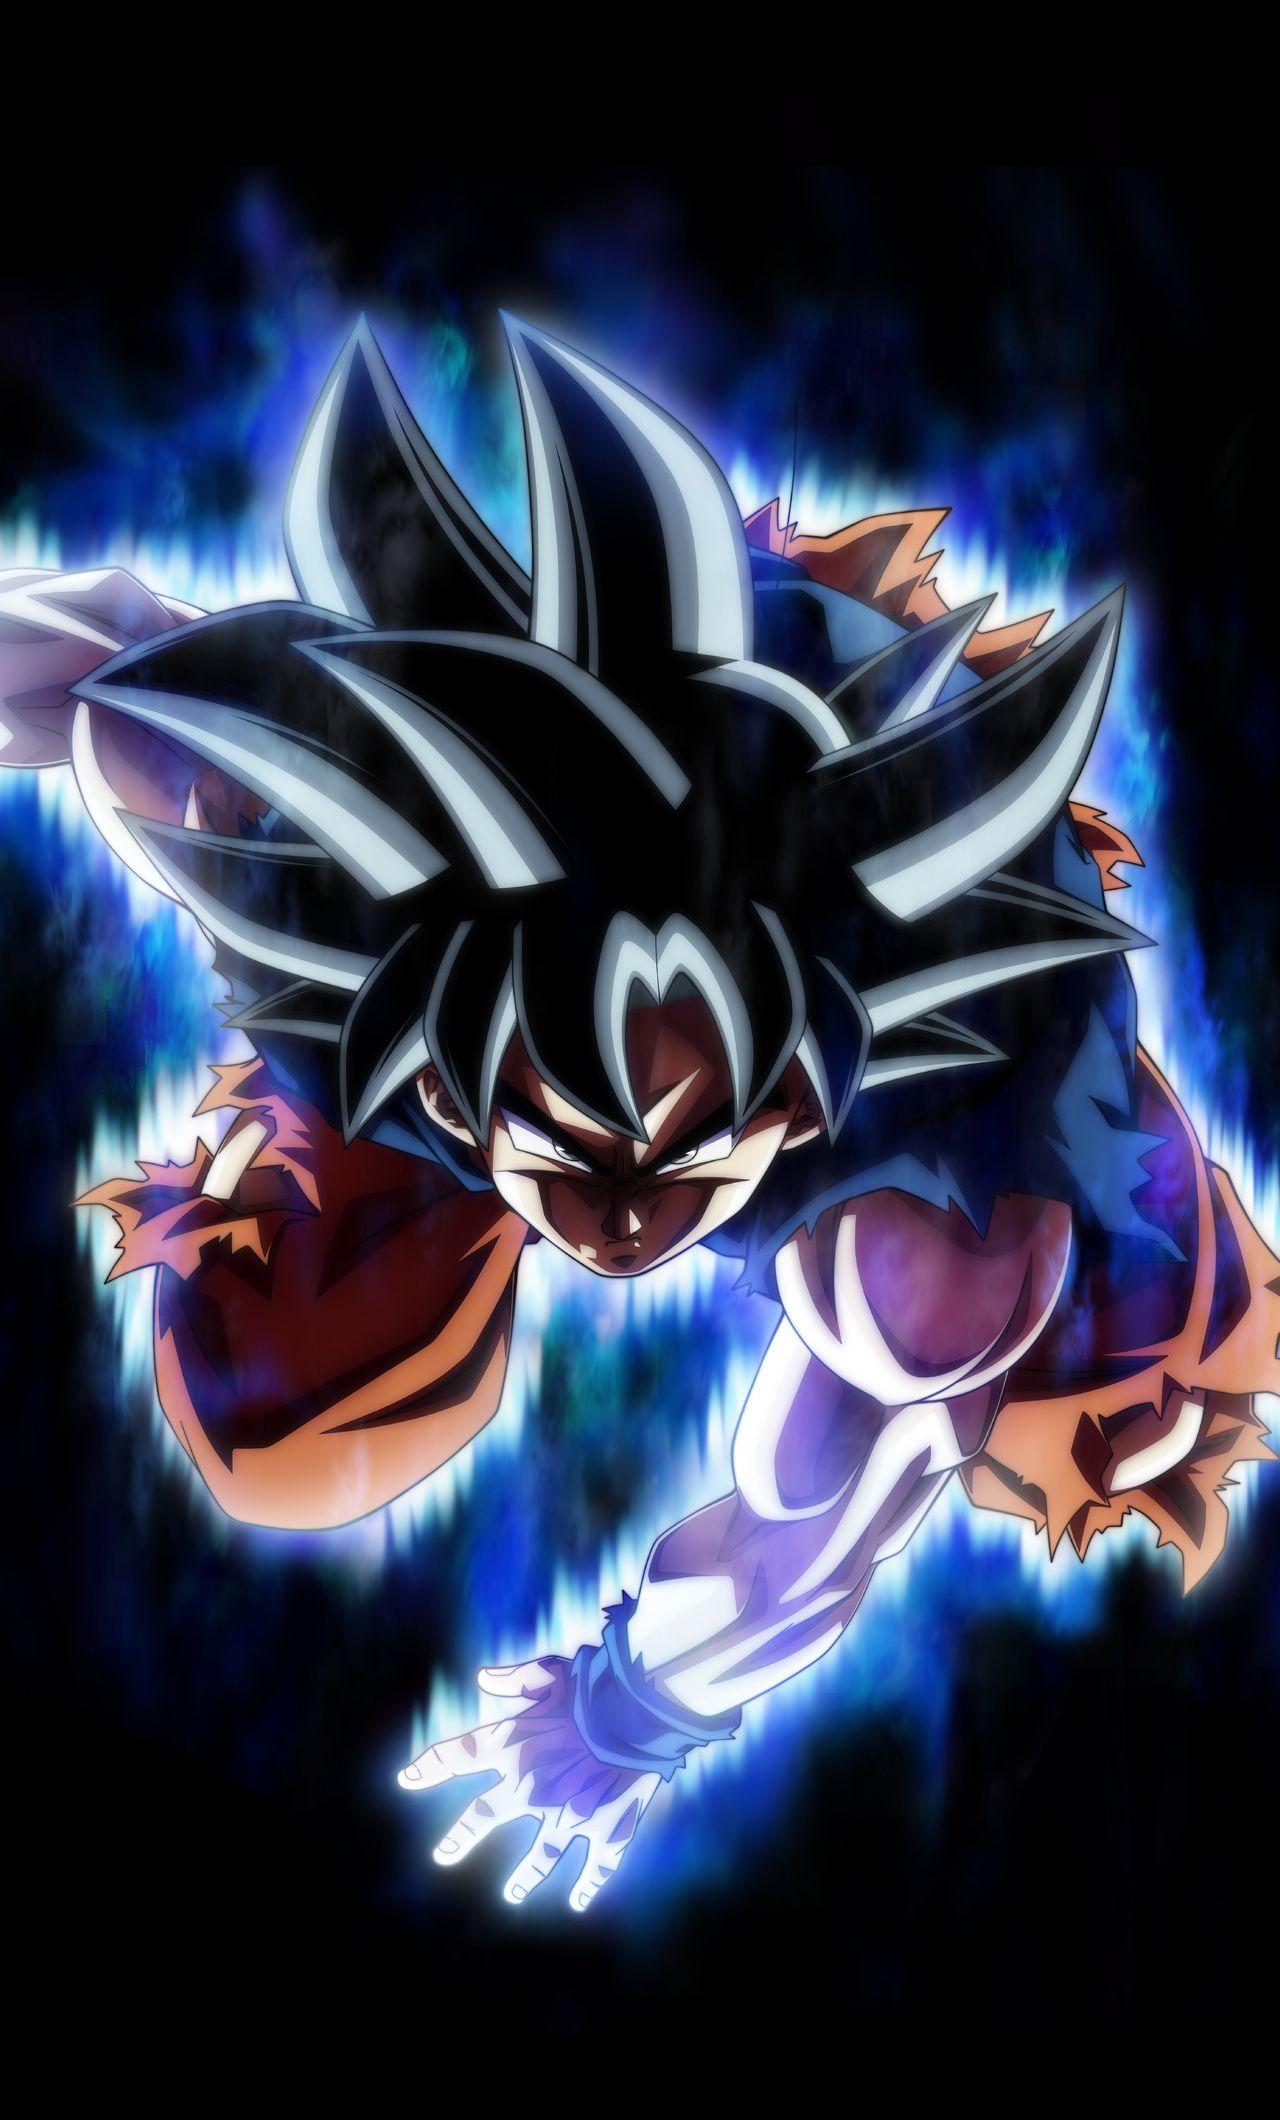 Dragon Ball Super Iphone Wallpapers Top Free Dragon Ball Super Iphone Backgrounds Wallpaperaccess